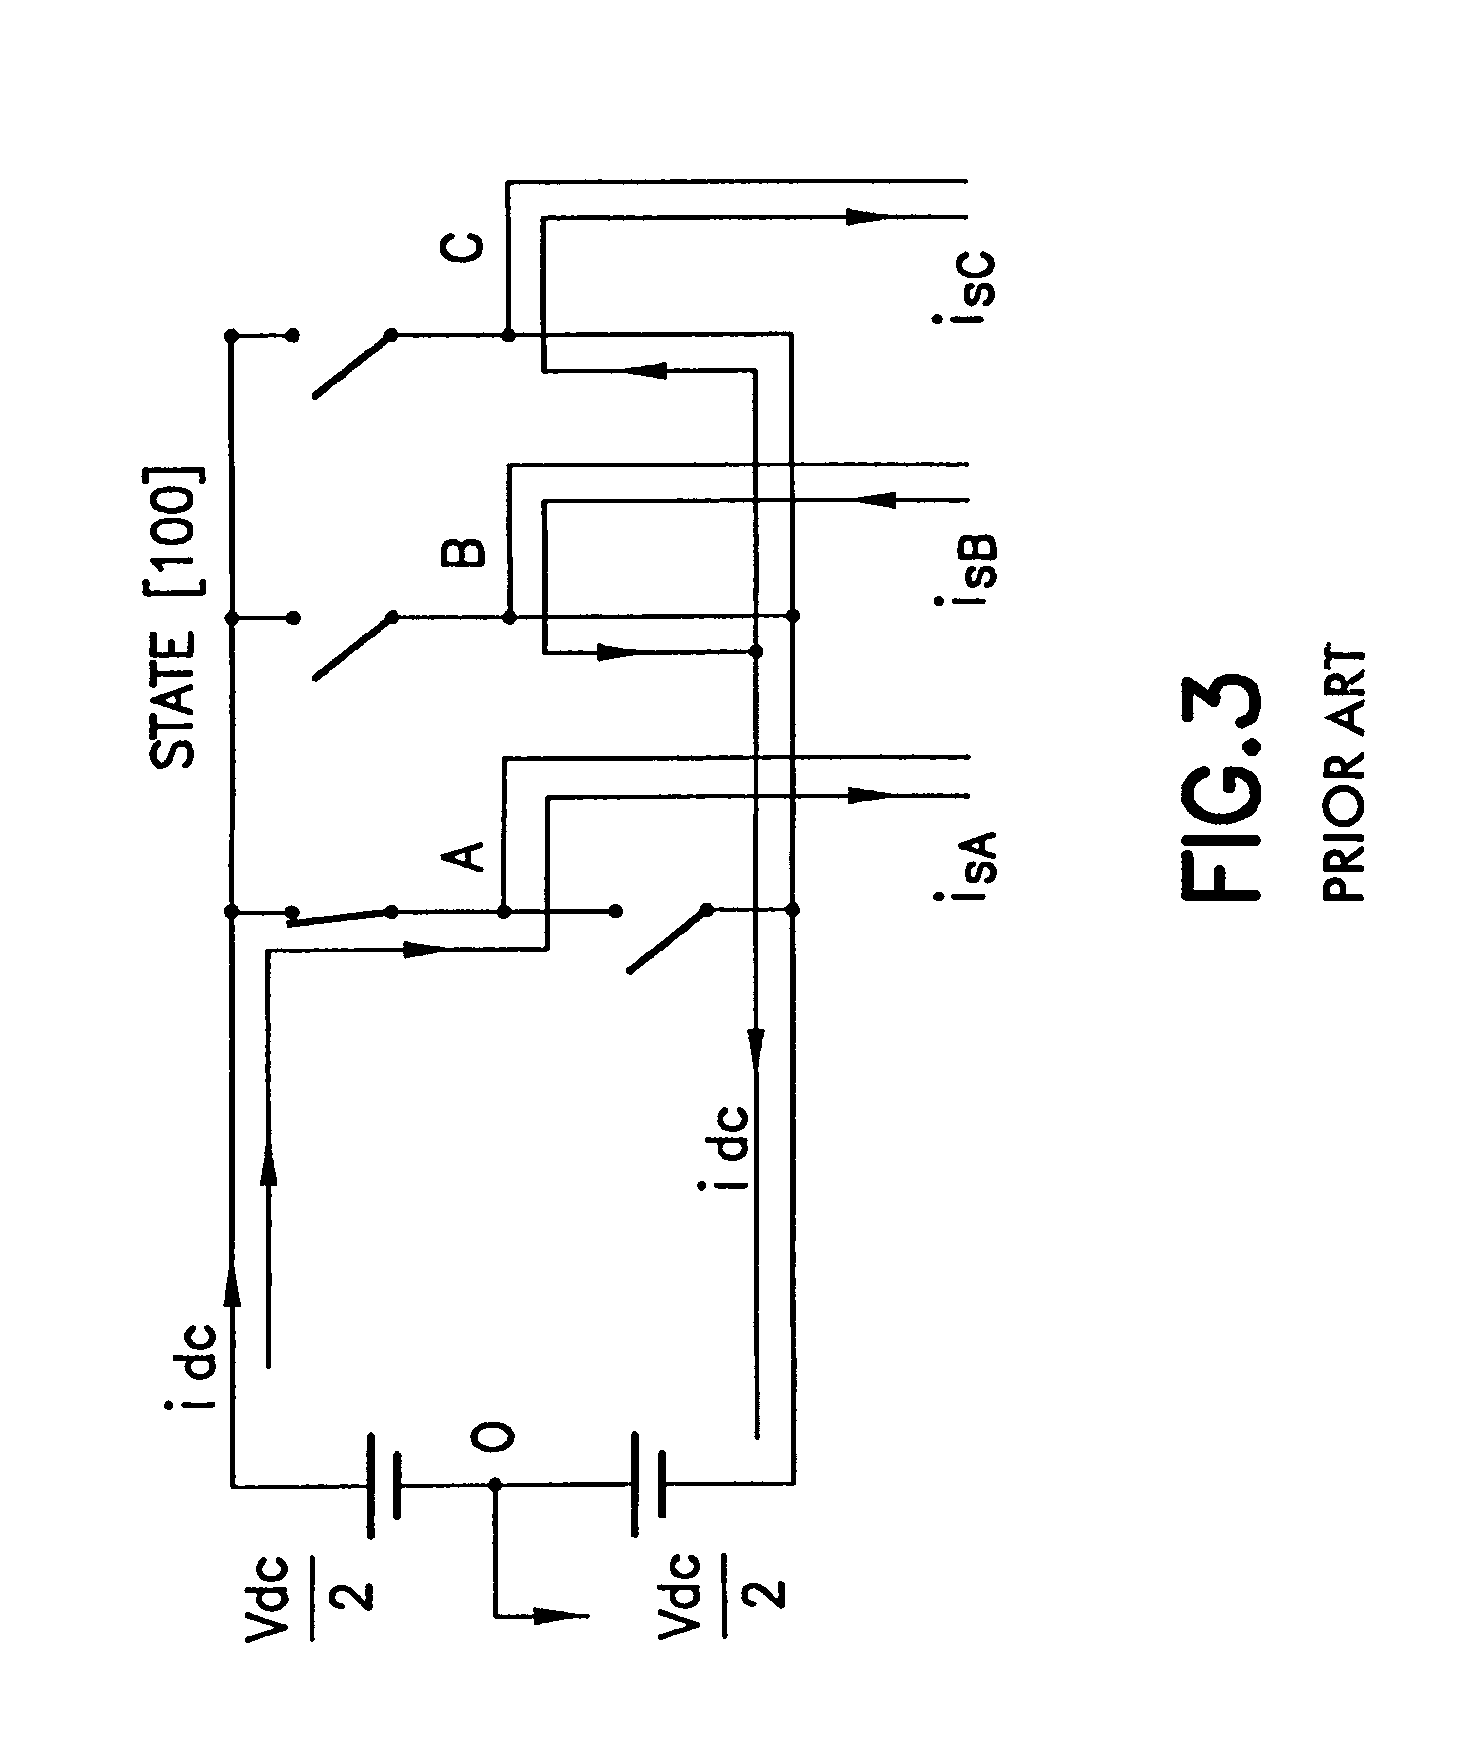 Method and apparatus for reconstructing motor current from DC bus current